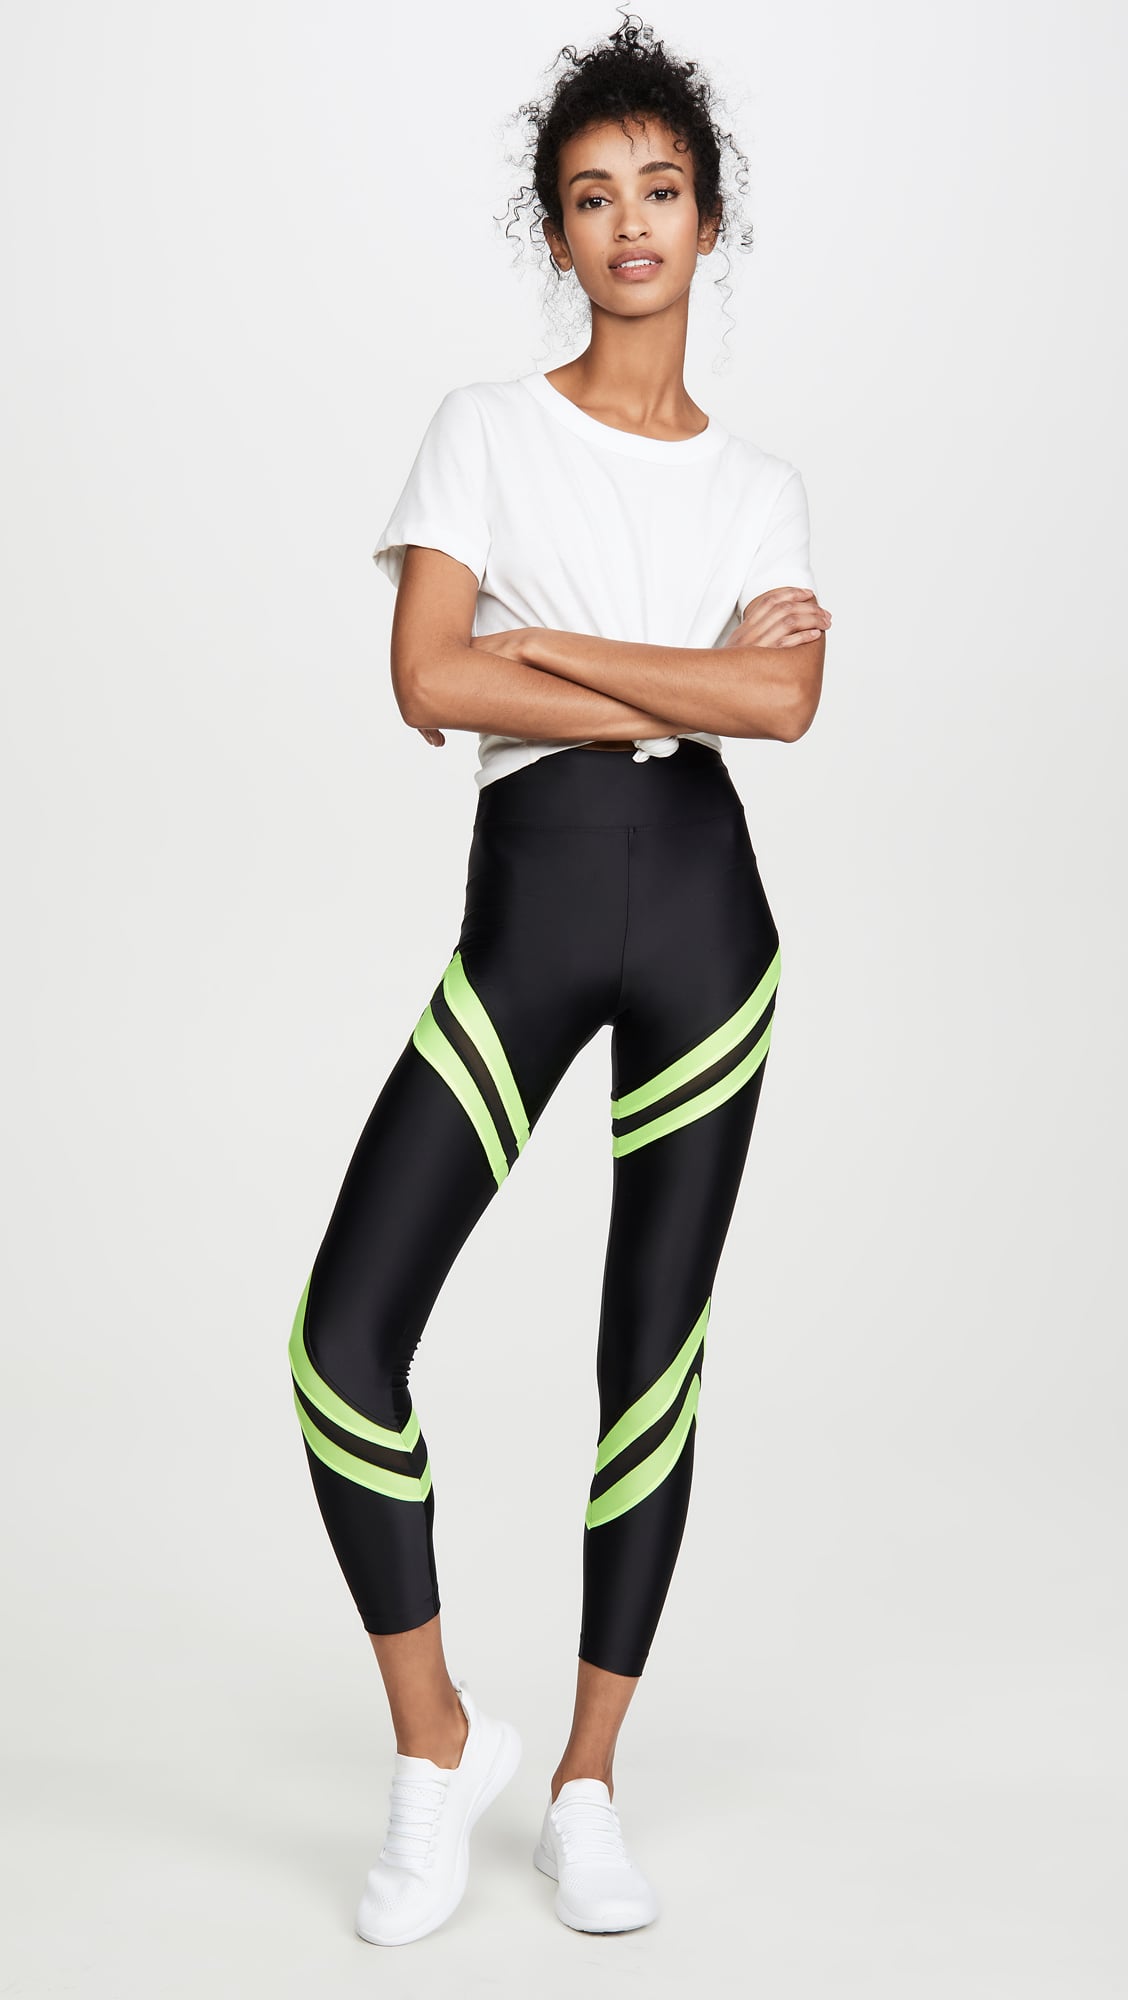 Crush Your New Year's Resolutions With Koral Activewear